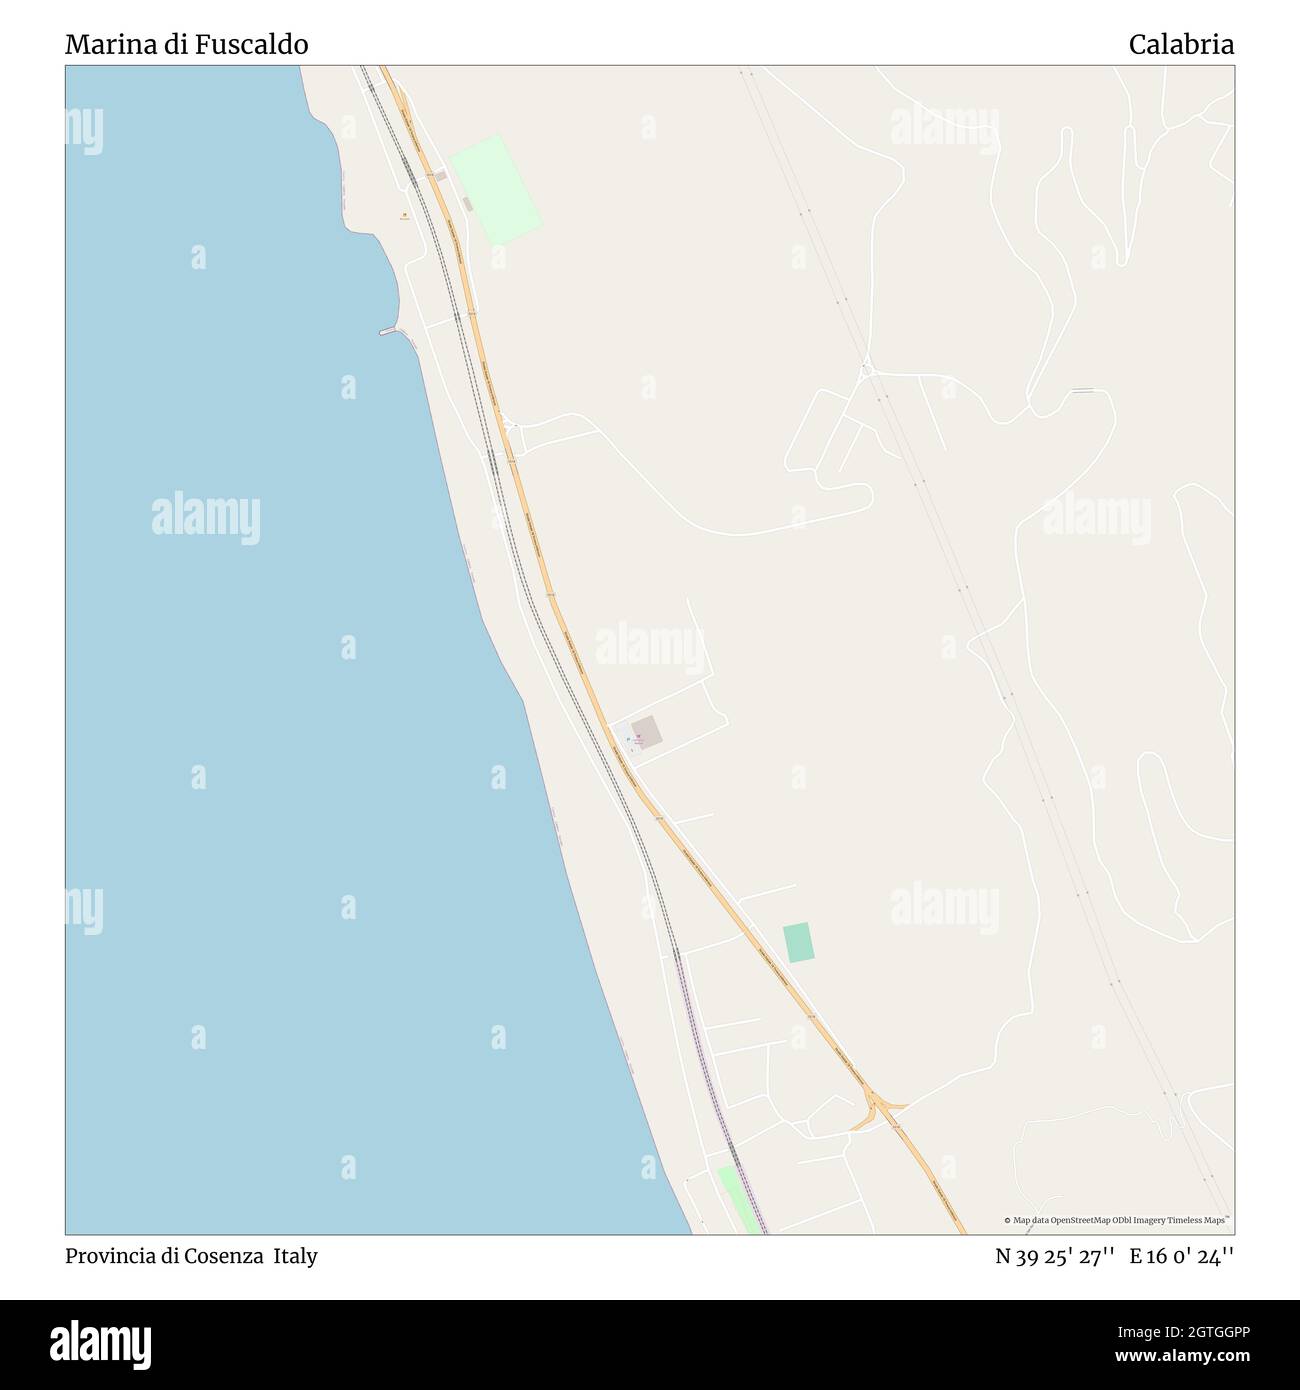 Marina di Fuscaldo, Provincia di Cosenza, Italy, Calabria, N 39 25' 27'', E 16 0' 24'', map, Timeless Map published in 2021. Travelers, explorers and adventurers like Florence Nightingale, David Livingstone, Ernest Shackleton, Lewis and Clark and Sherlock Holmes relied on maps to plan travels to the world's most remote corners, Timeless Maps is mapping most locations on the globe, showing the achievement of great dreams Stock Photo